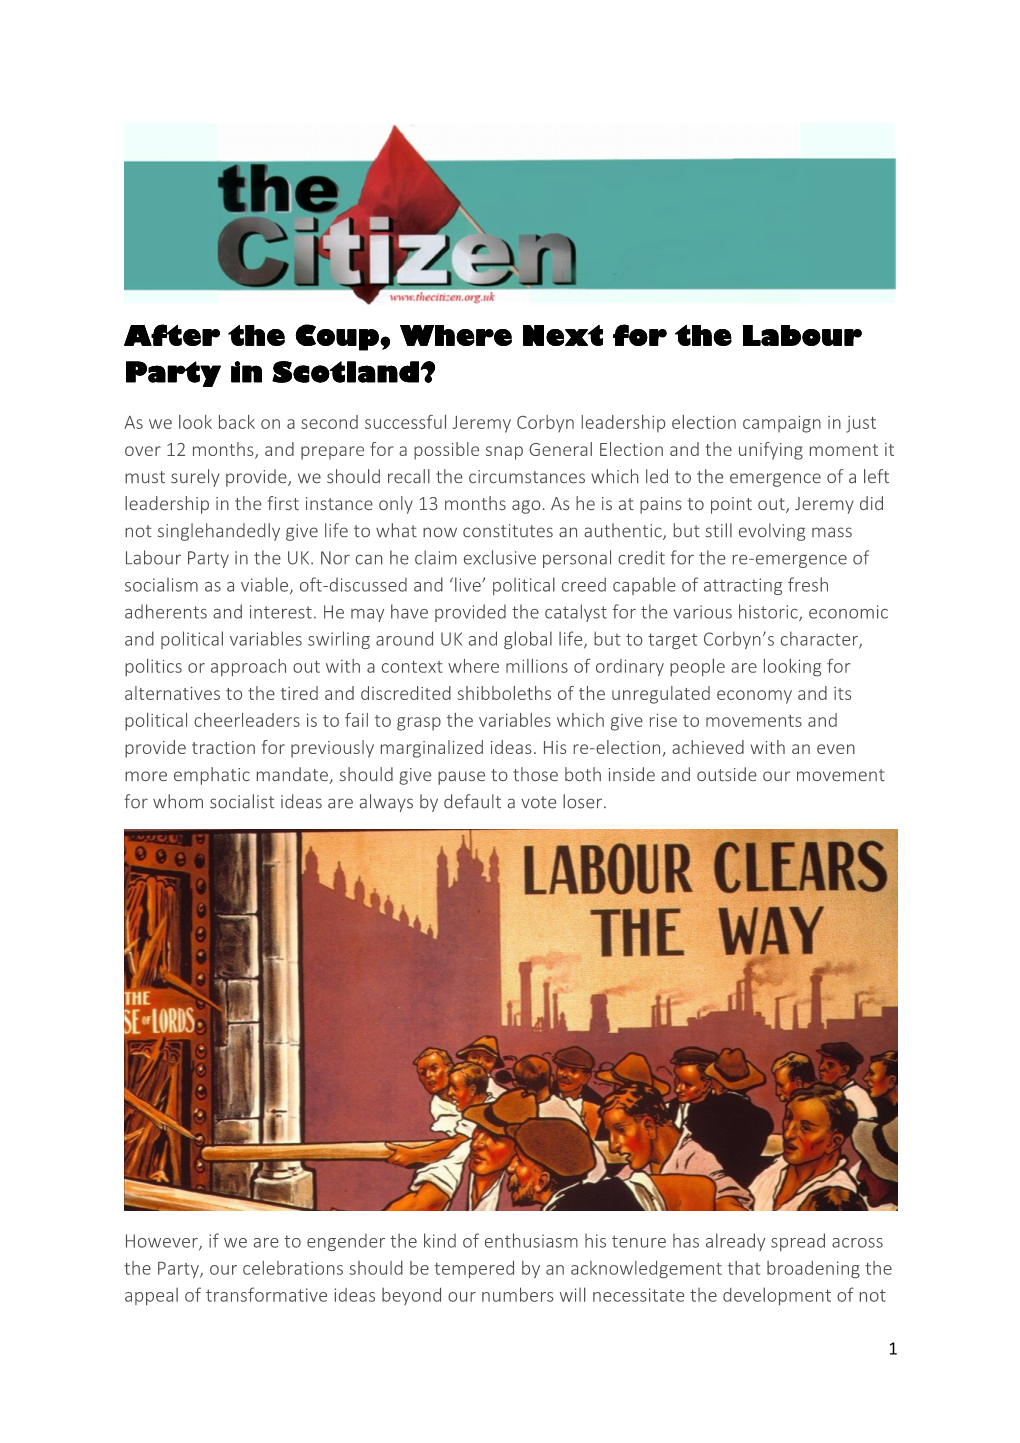 After the Coup, Where Next for the Labour Party in Scotland?